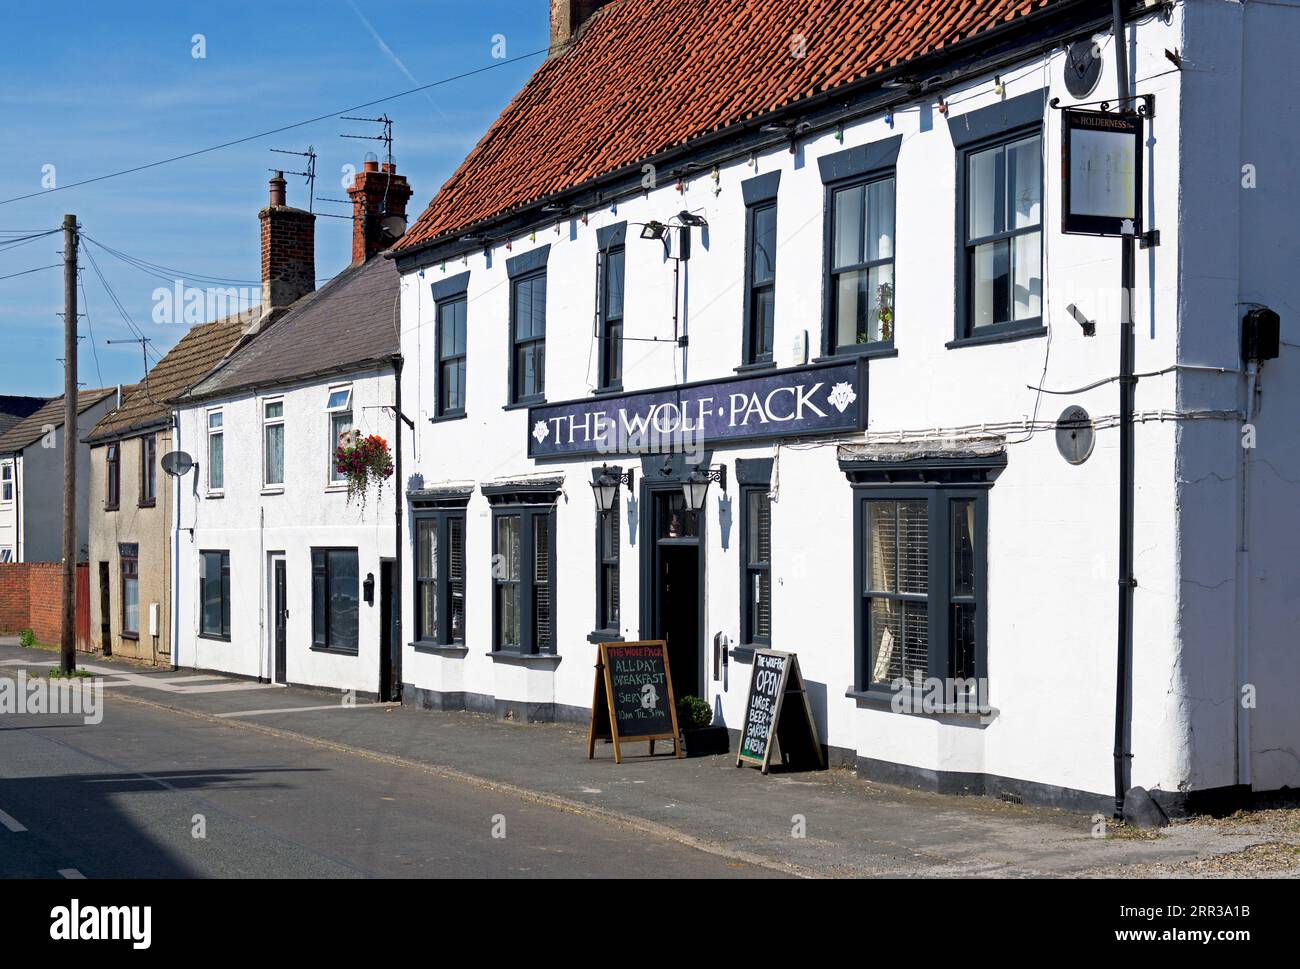 The Wolf Pack pub in Patrington, Holderness, East Yorkshire, England UK Stock Photo